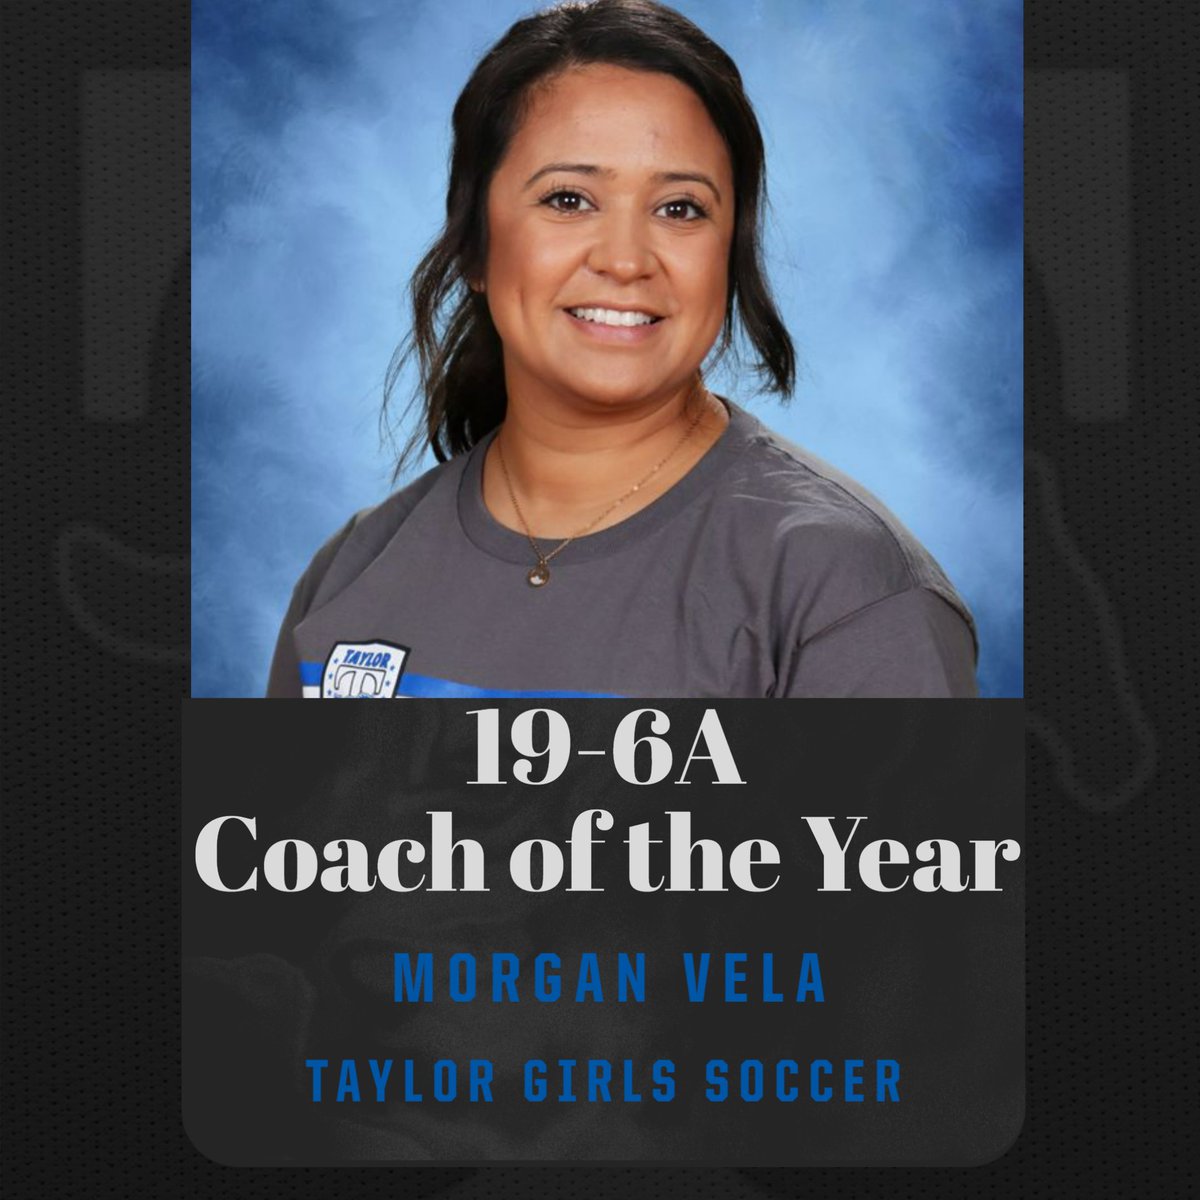 We want to congratulate Coach Vela and Coach Eidson on both being named 19-6A Coaches of the year for the soccer season!